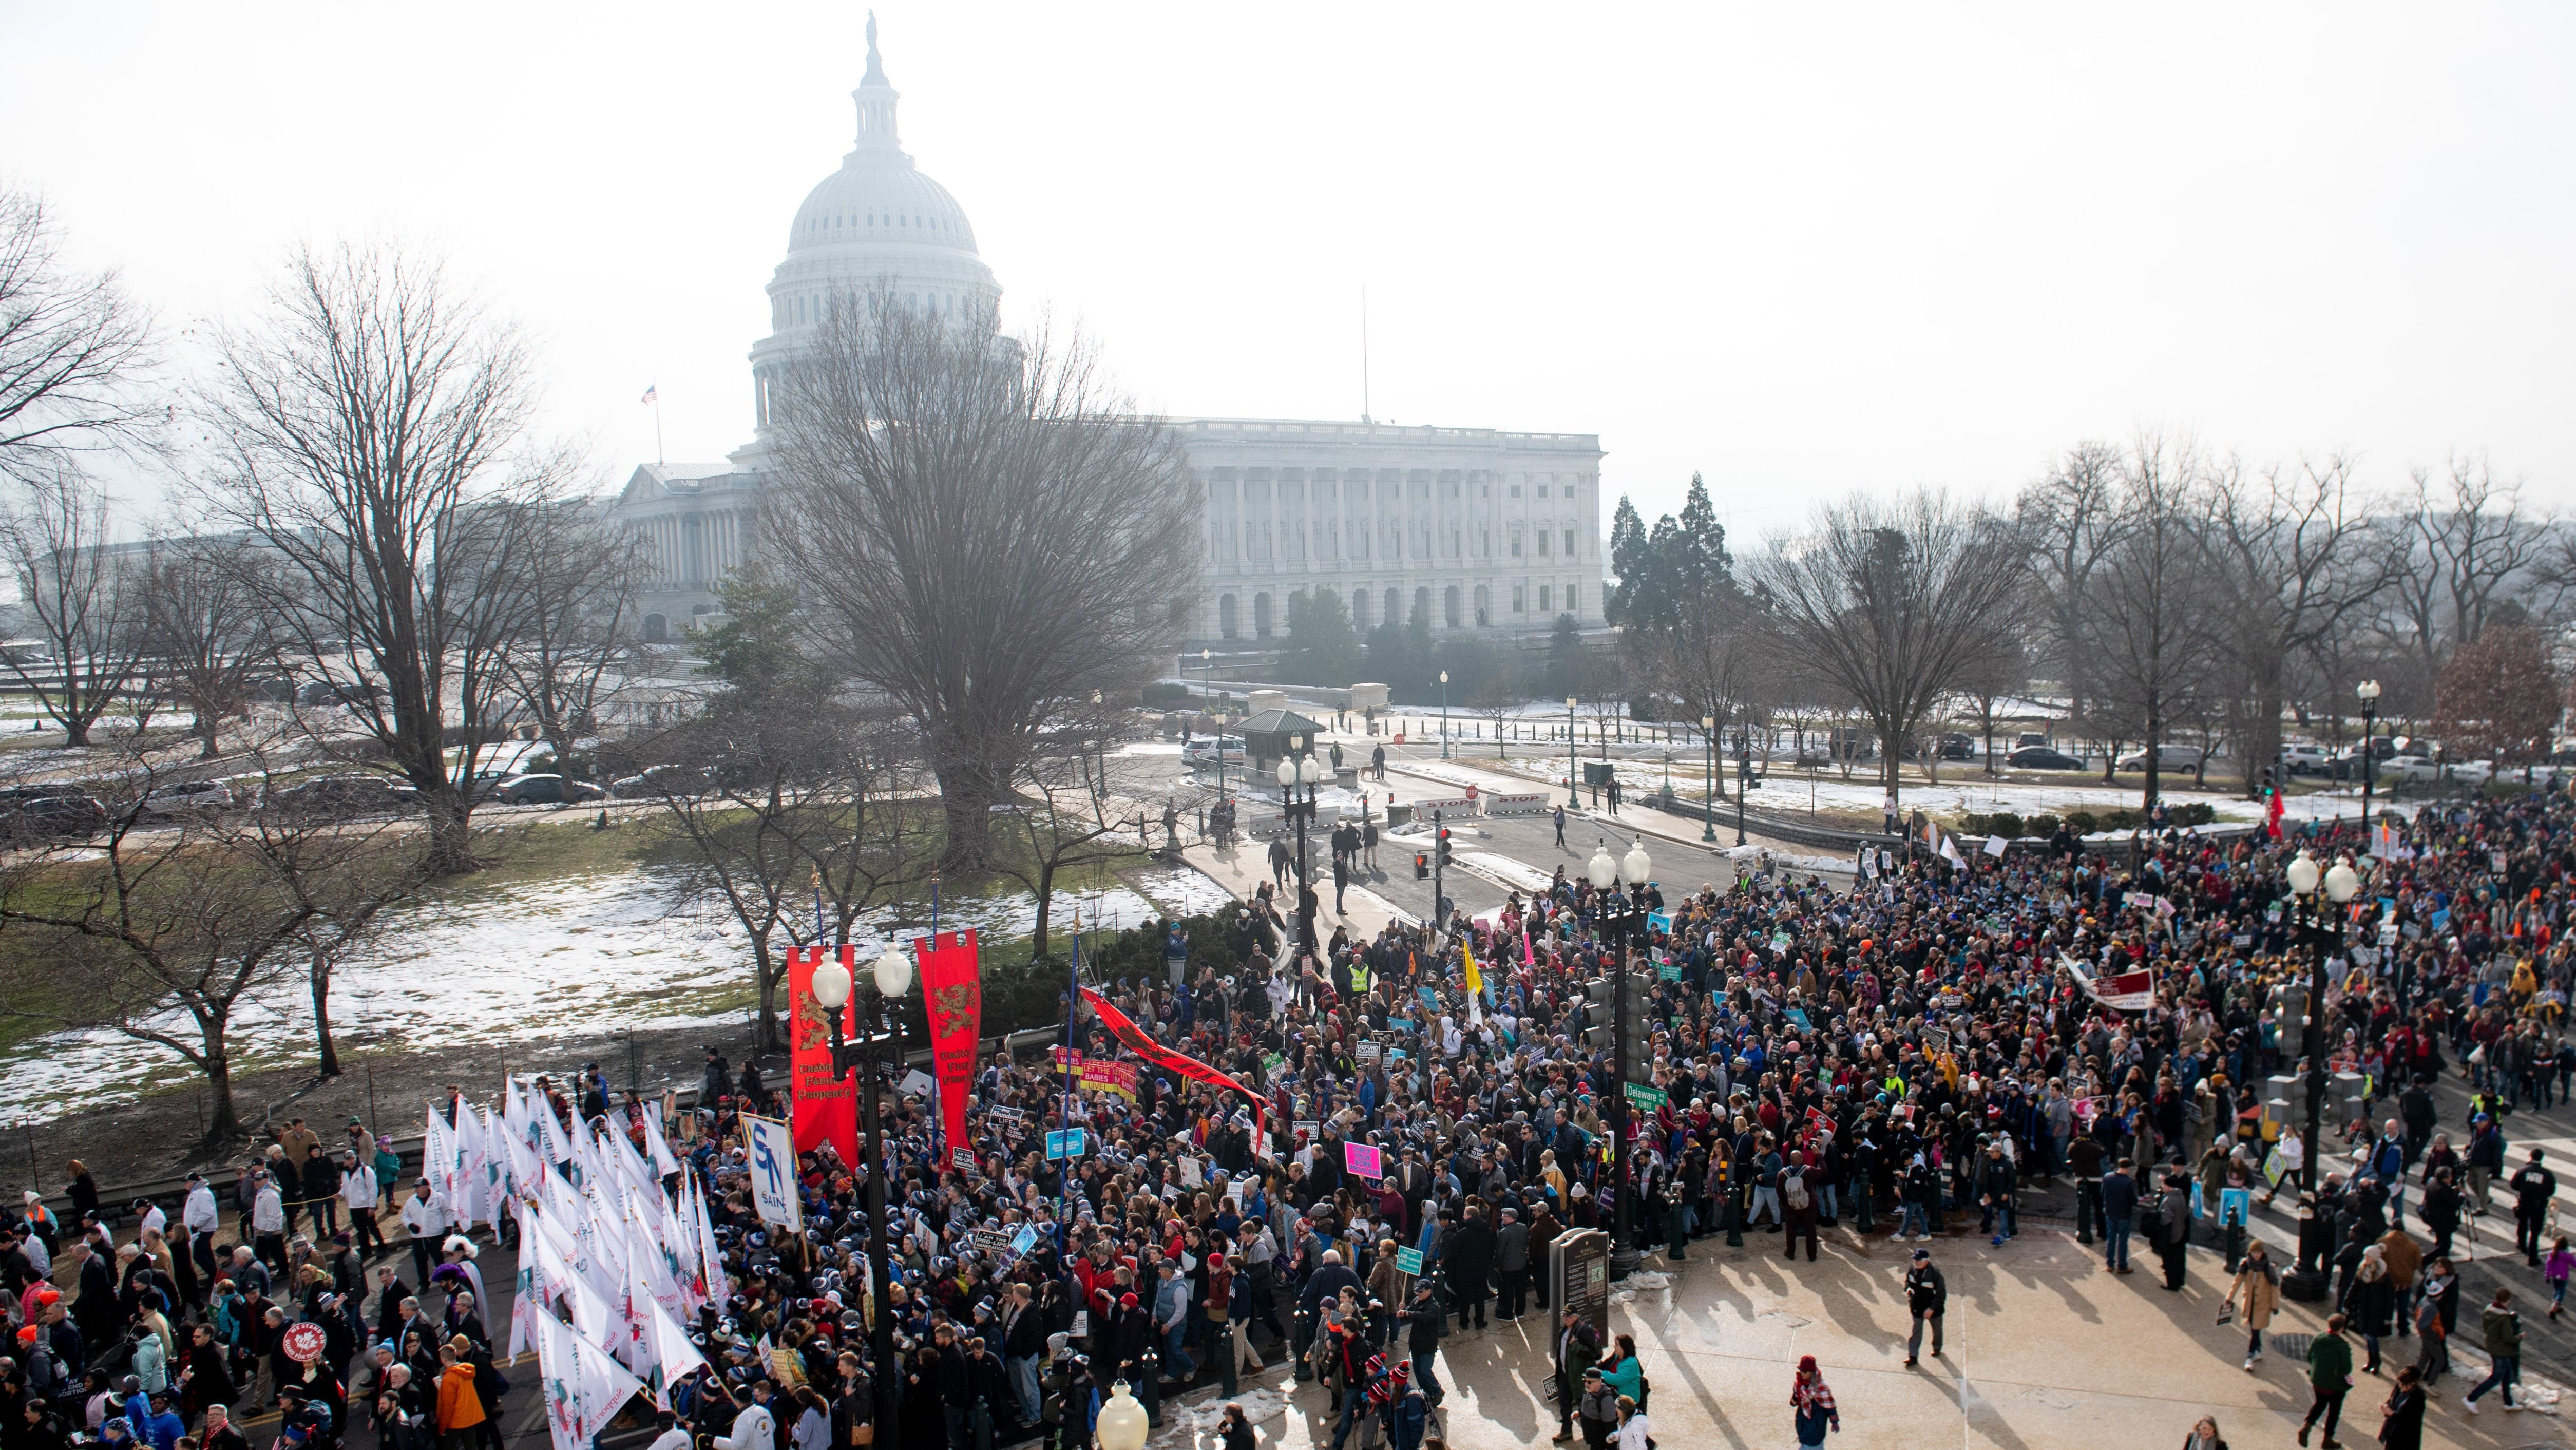 March for Life 2019 Crowd Size Photos & Numbers